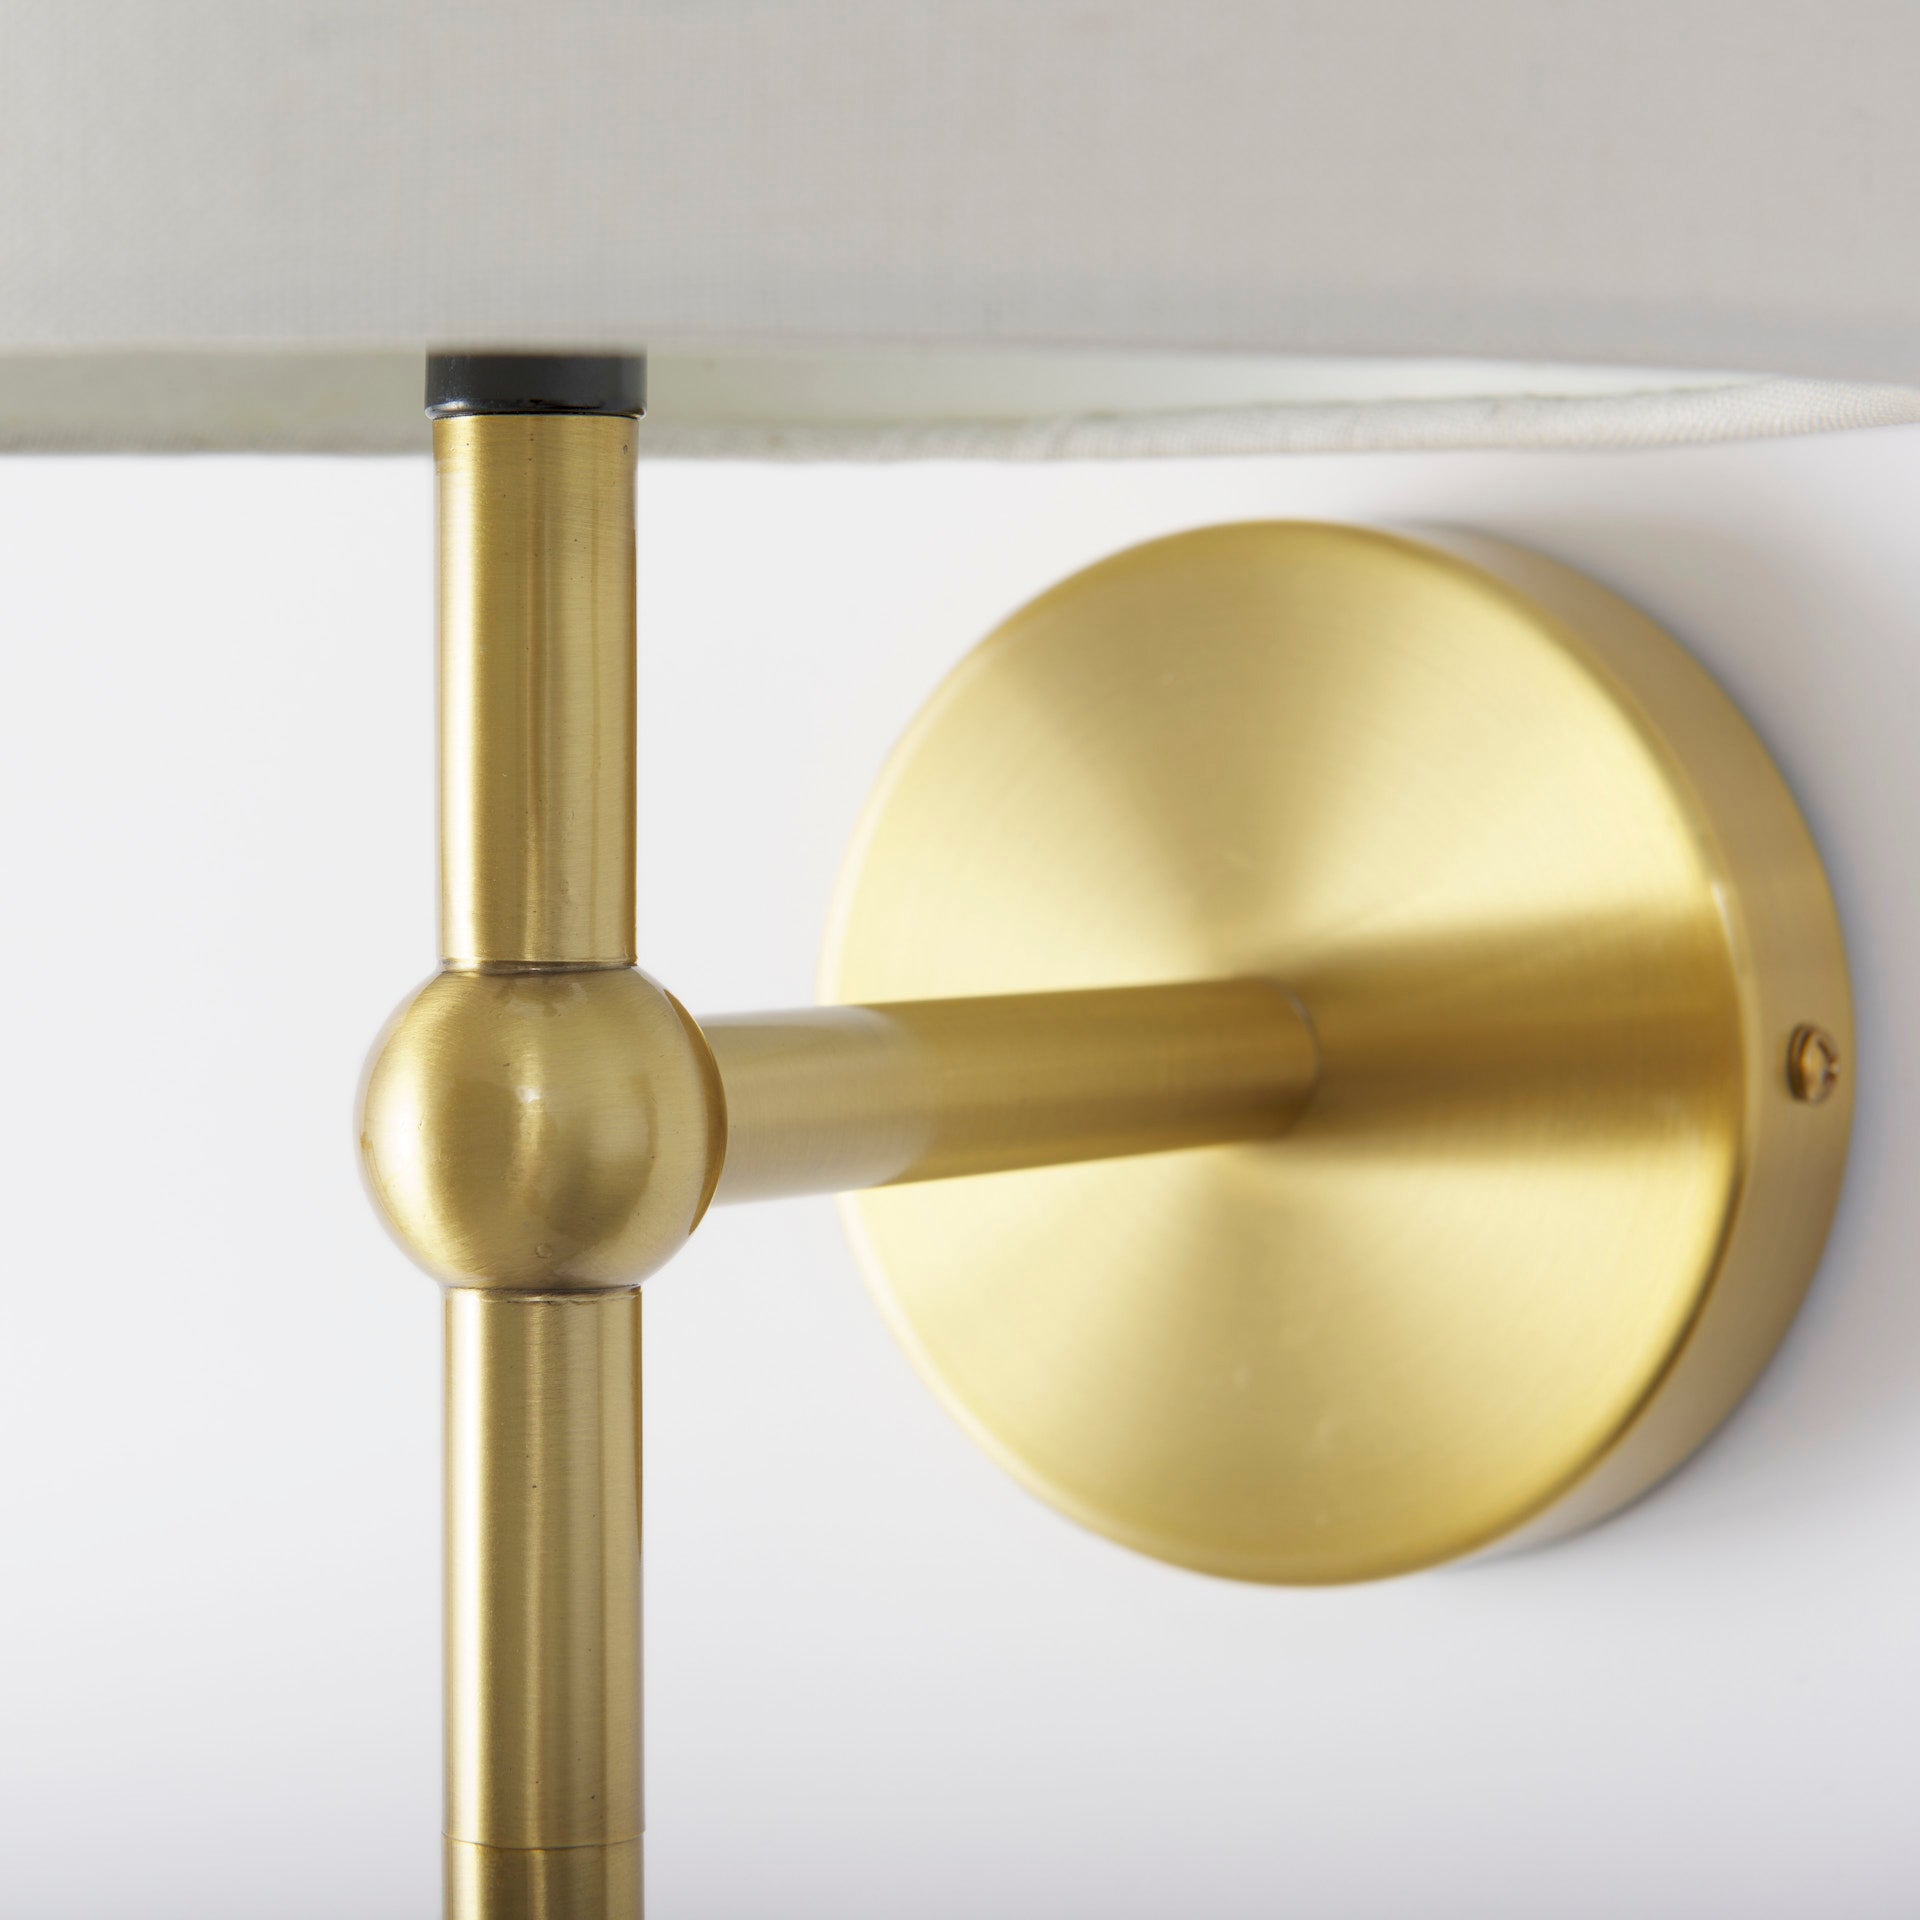 Chelsey Wall Sconce - Gold